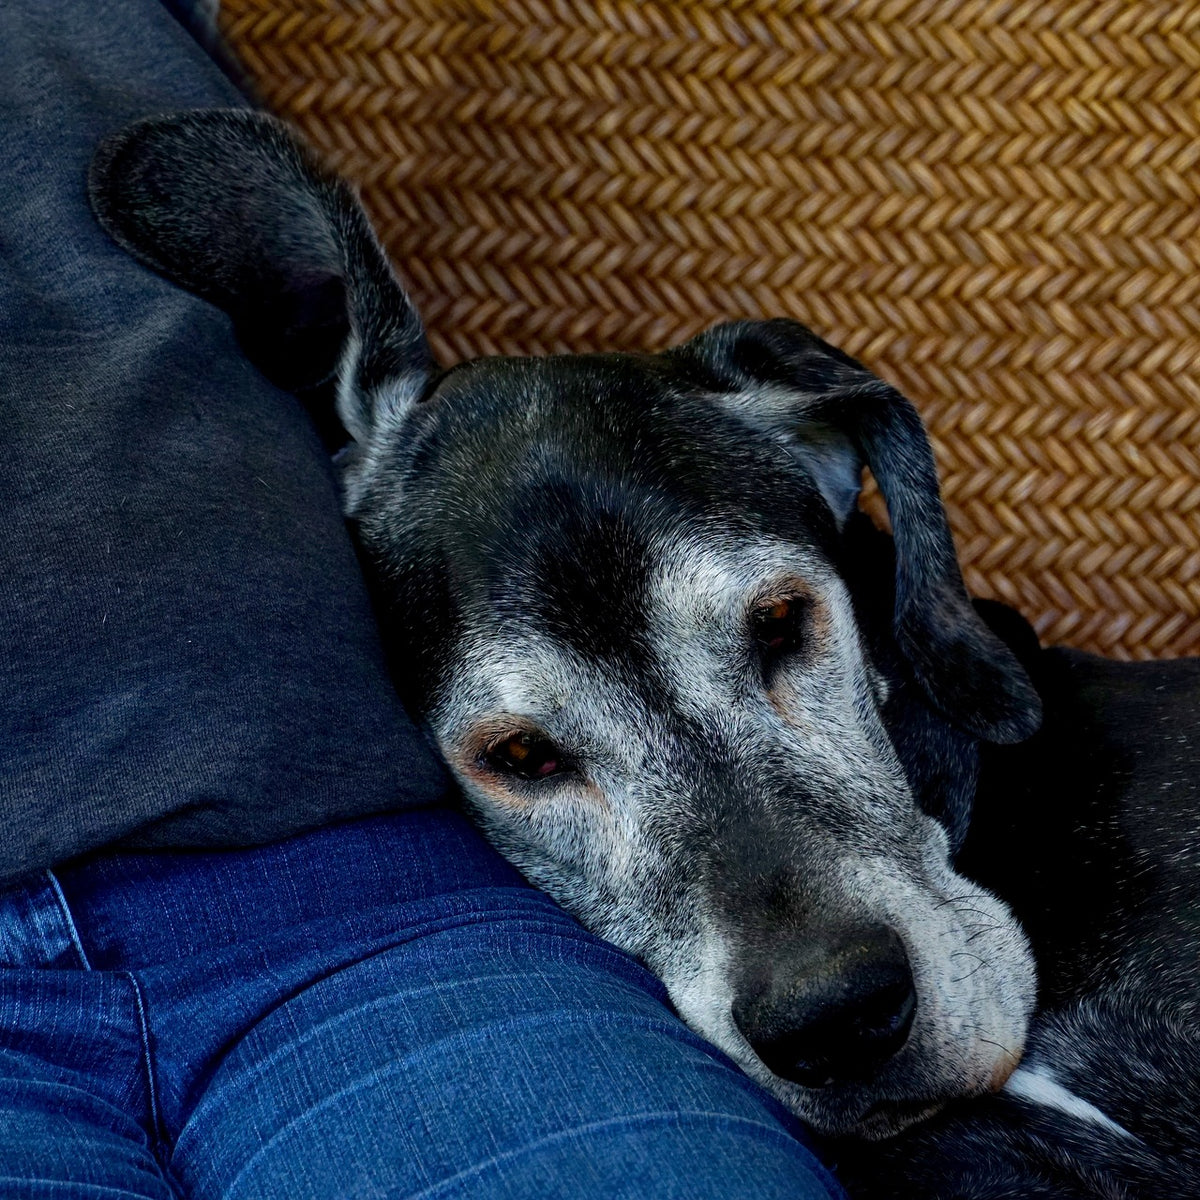 How to Entertain an Old Dog: 6 Ideas for Bored Senior Dogs · The Wildest